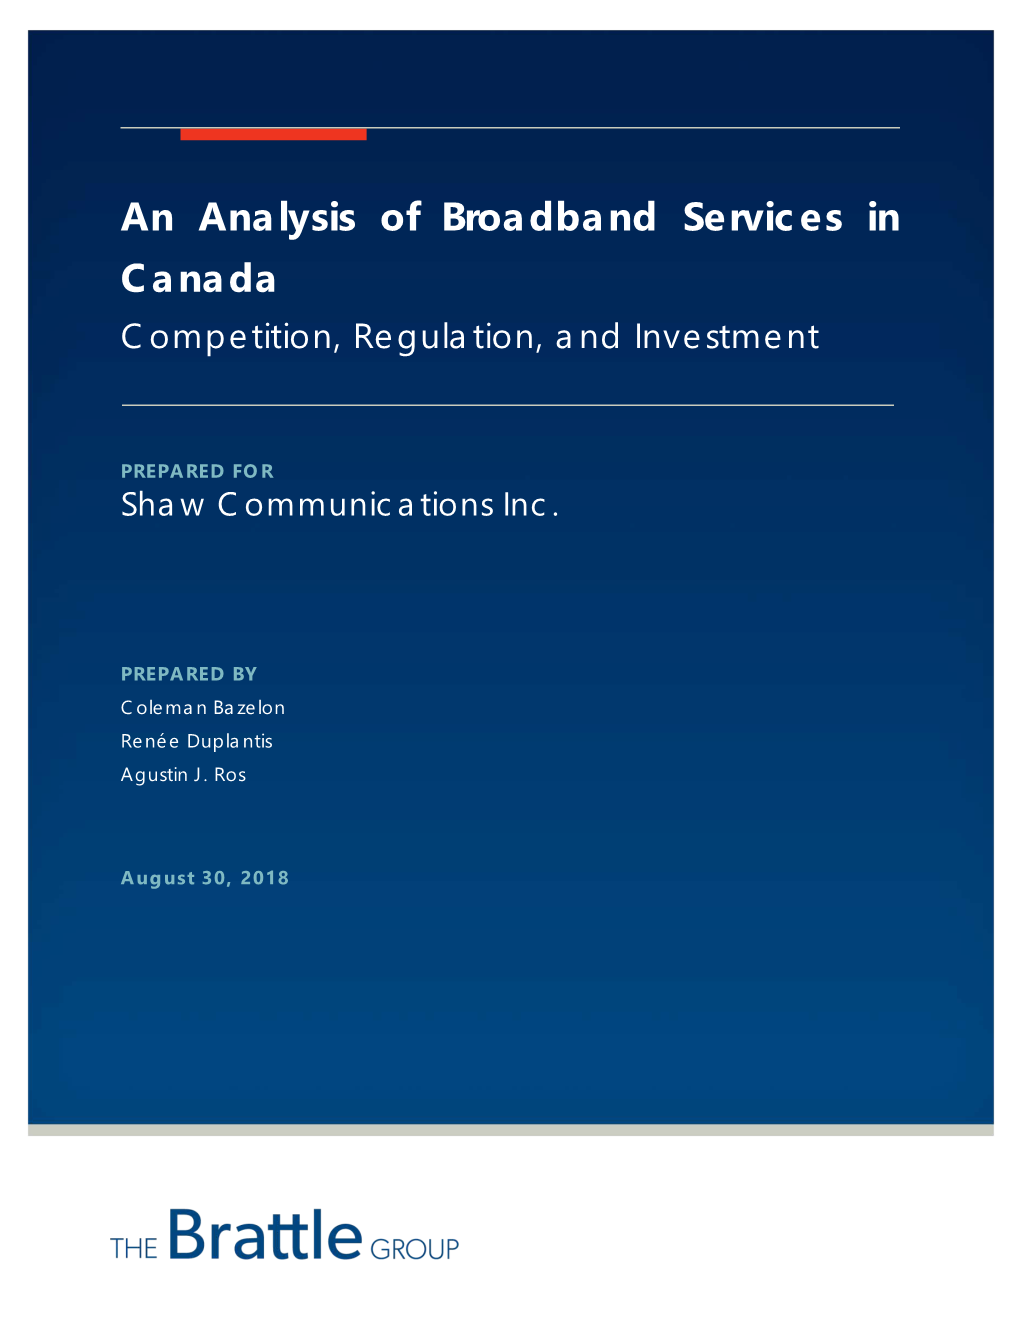 An Analysis of Broadband Services in Canada Competition, Regulation, and Investment